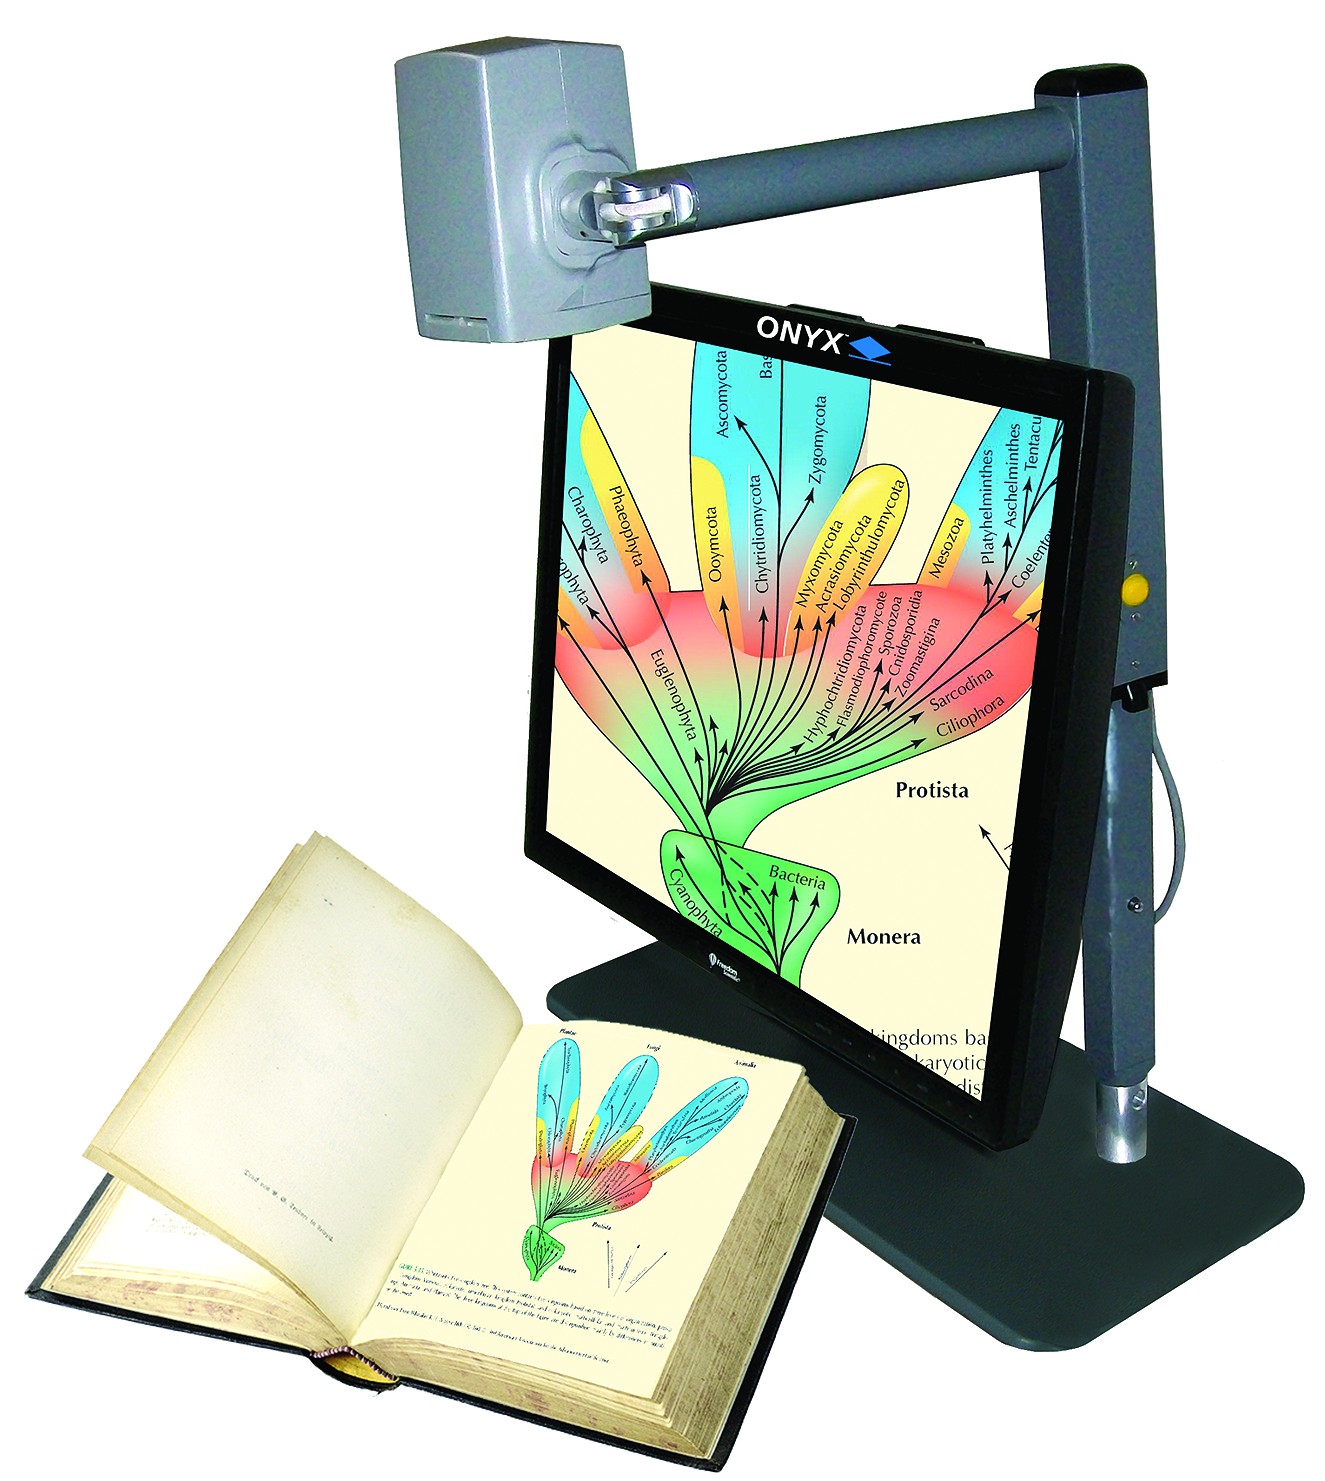 ONYX Deskset with a book under the camera, being magnified displayed on screen.